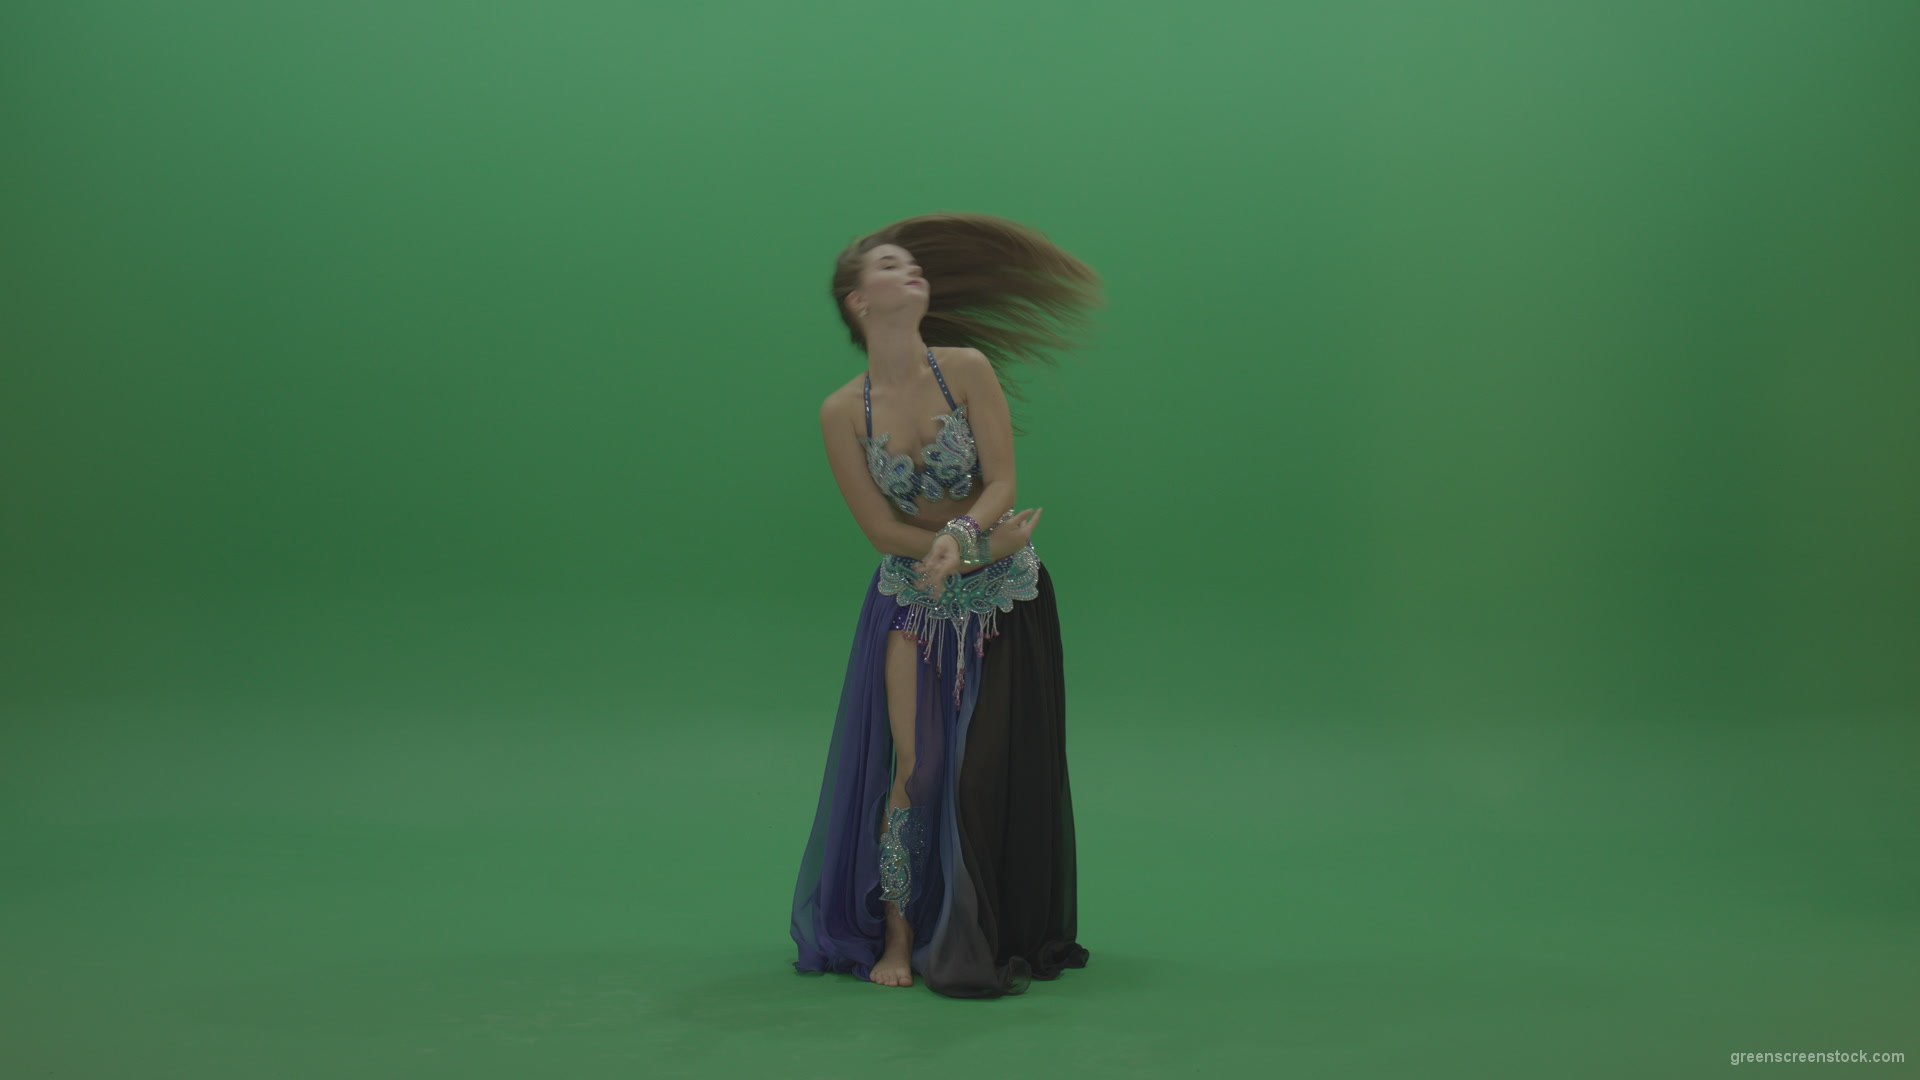 Foxy-belly-dancer-in-purple-and-black-wear-display-amazing-dance-moves-over-chromakey-background_004 Green Screen Stock